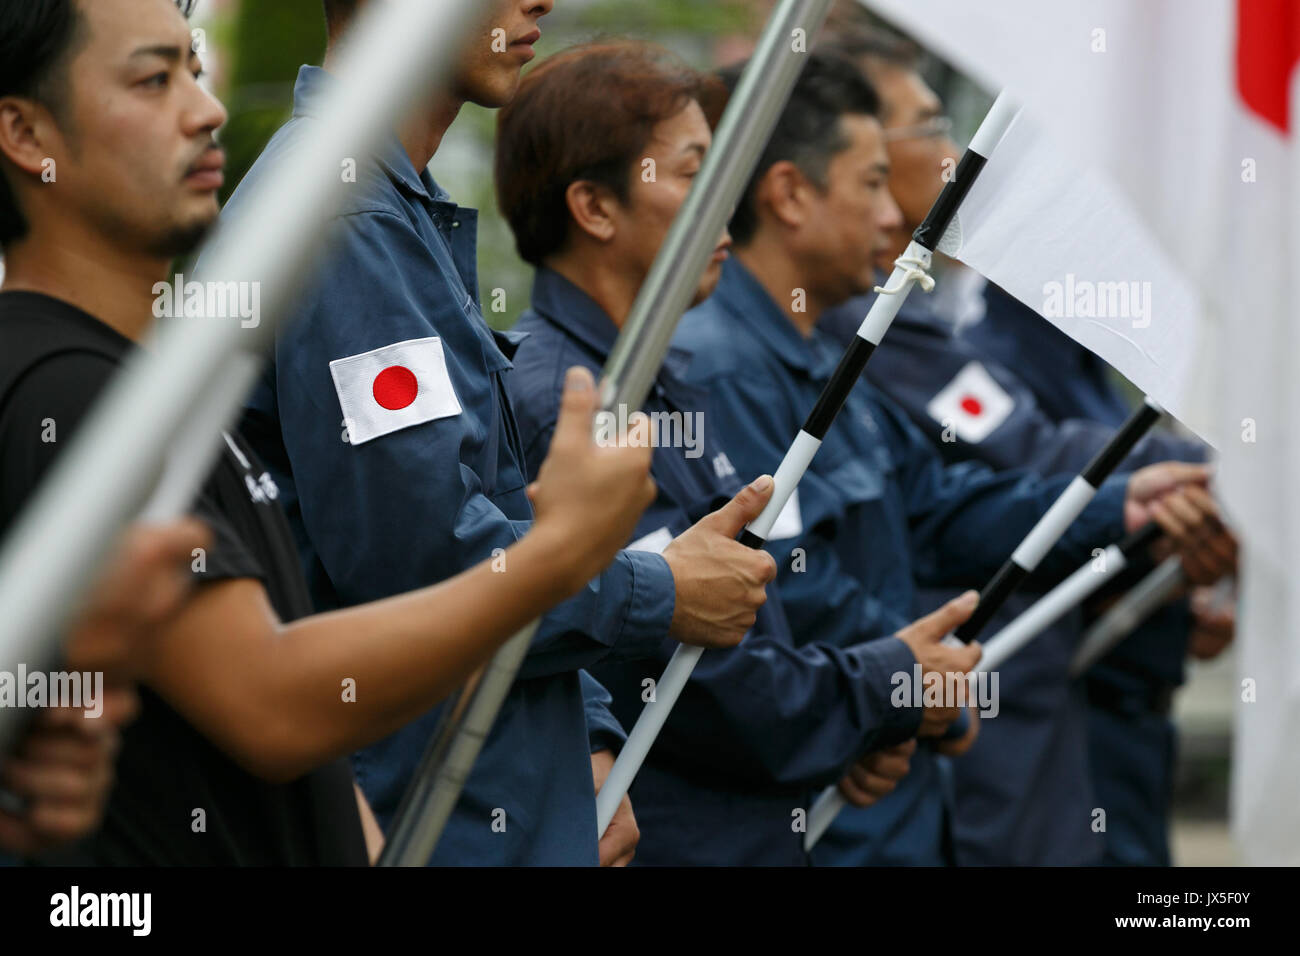 Tokyo, Japan. 15th Aug, 2017. Japanese nationalists dressed in military uniform hold war flags of the Imperial Japanese Army to pay their respects to the war dead at Yasukuni Shrine on the 72nd anniversary of Japan's surrender in World War II on August 15, 2017, Tokyo, Japan. Prime Minister Shinzo Abe was not among the lawmakers to visit the Shrine and instead sent a ritual offering to avoid angering neighboring countries who also associate Yasukuni with war criminals and Japan's imperial past. Credit: Rodrigo Reyes Marin/AFLO/Alamy Live News Stock Photo